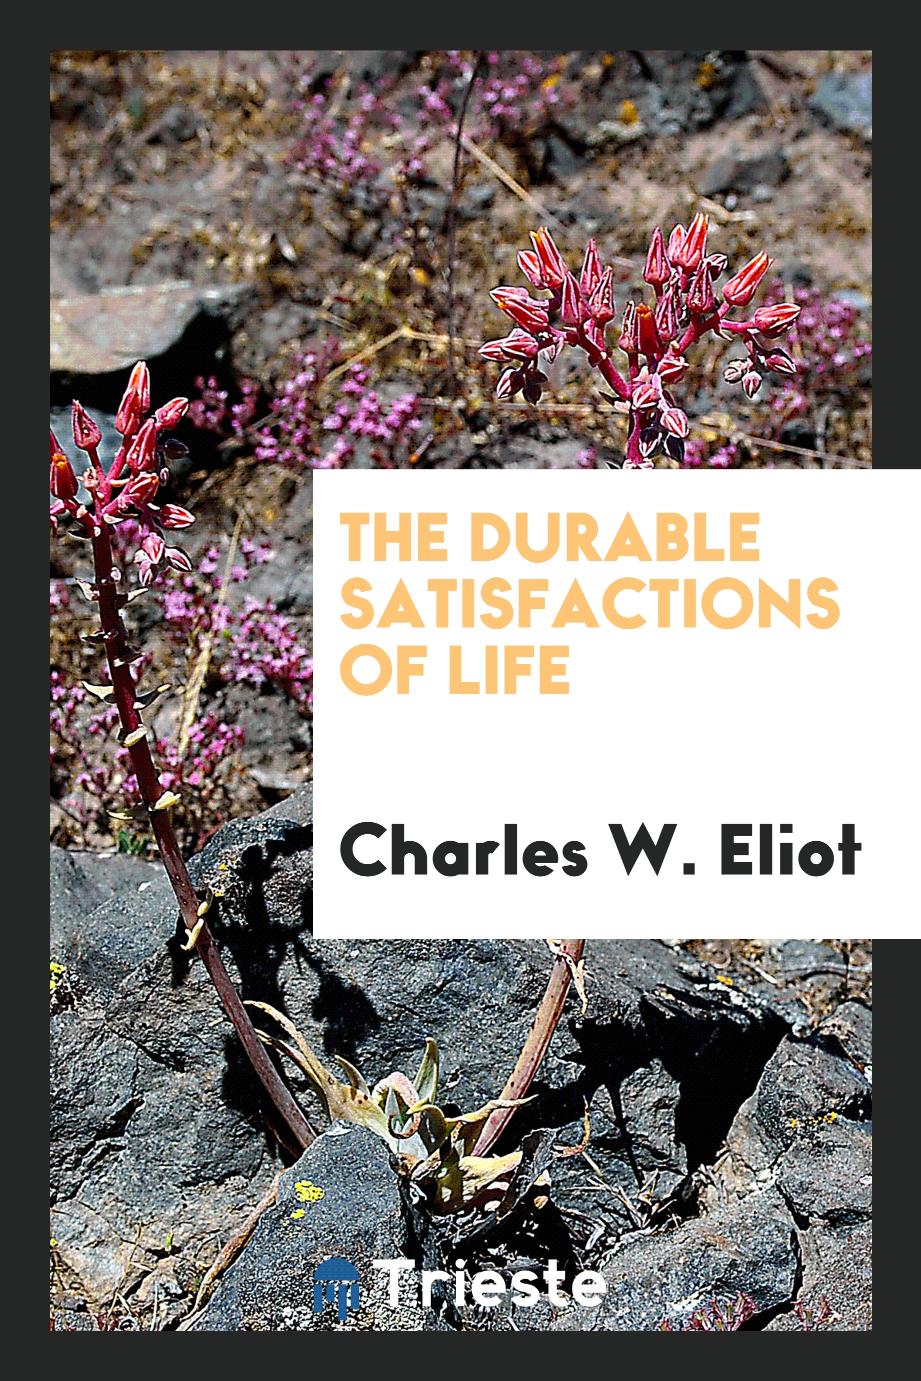 The durable satisfactions of life